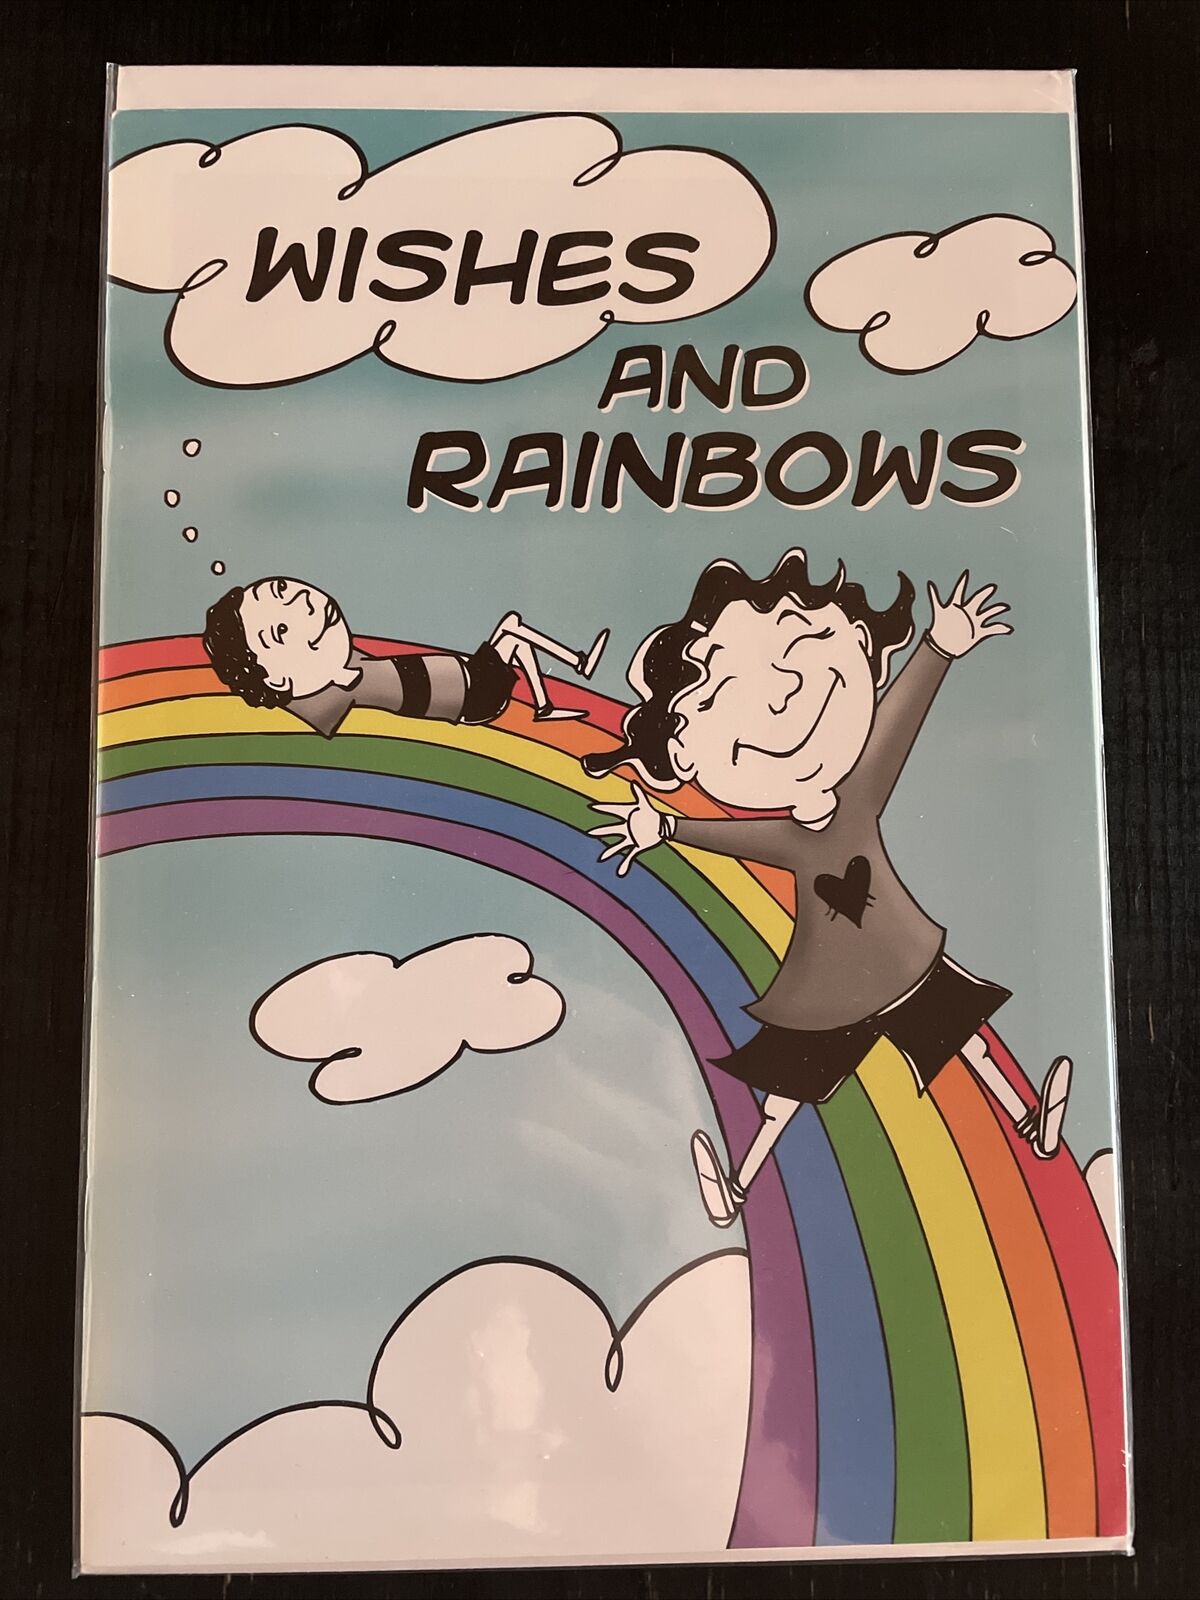 Federal Reserve Bank Of Boston Wishes And Rainbows Comic Book